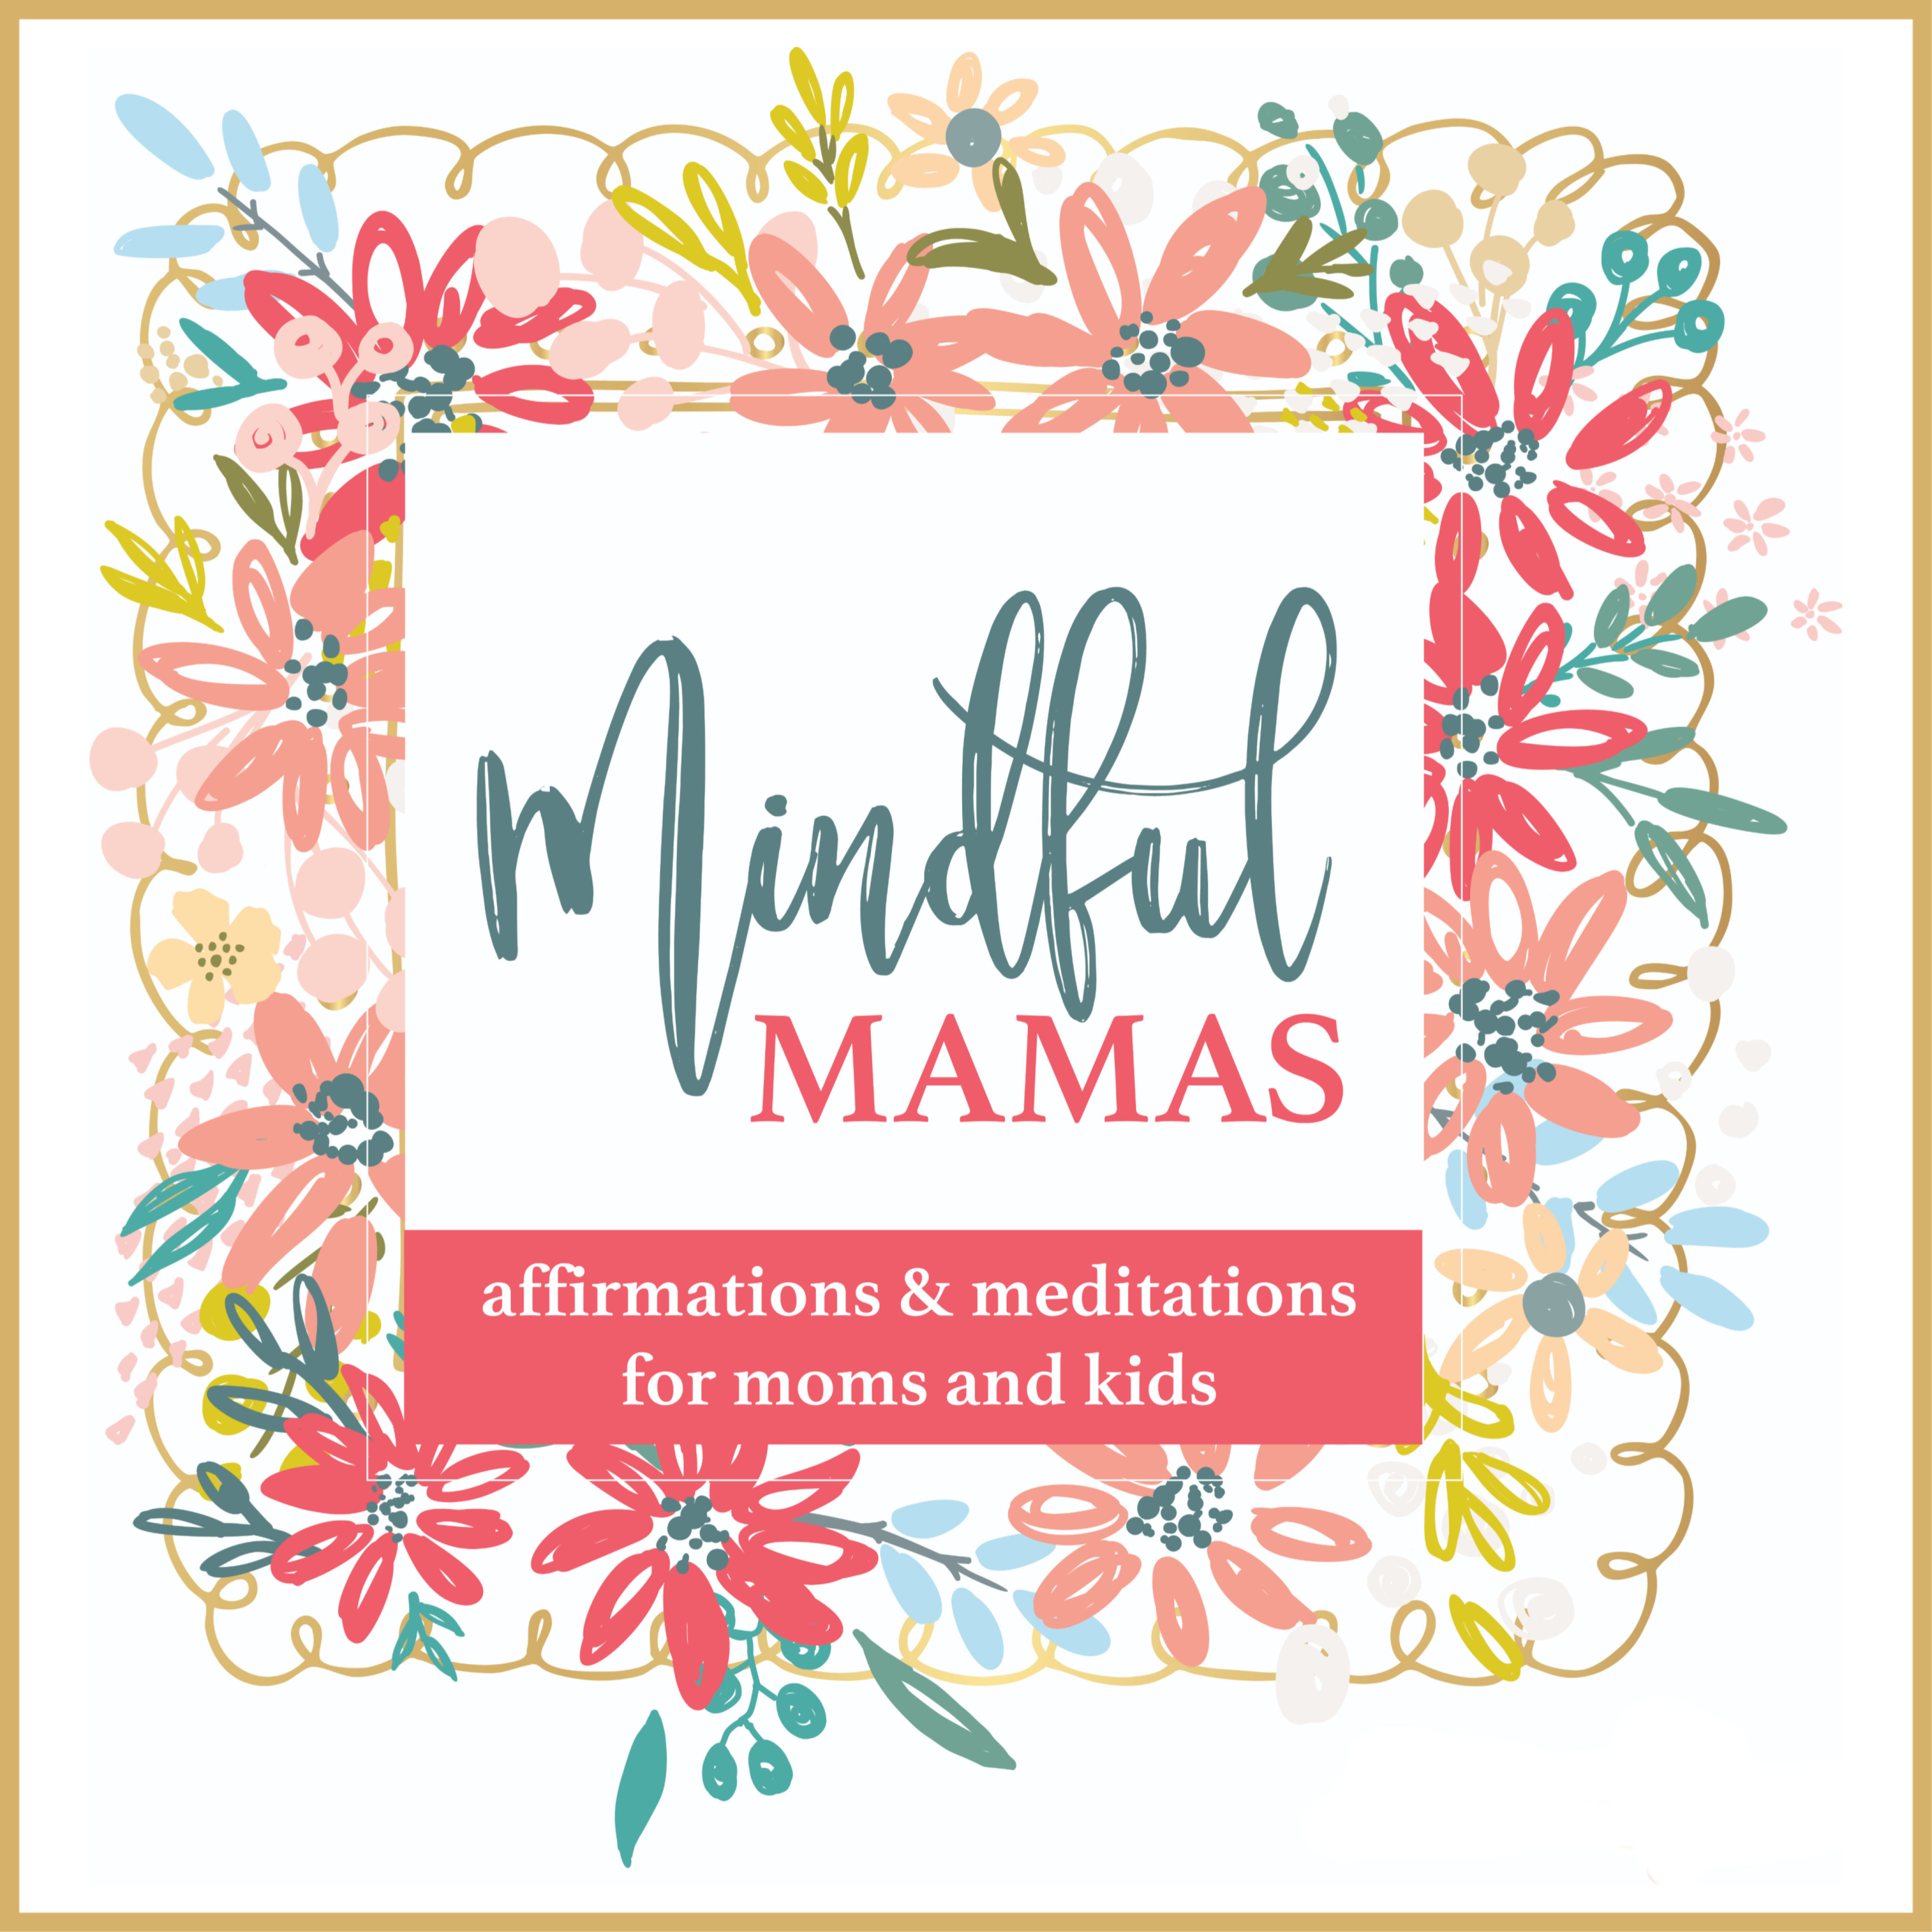 Mindful Mamas - an Affirmation and Meditation Album for Moms and Kids